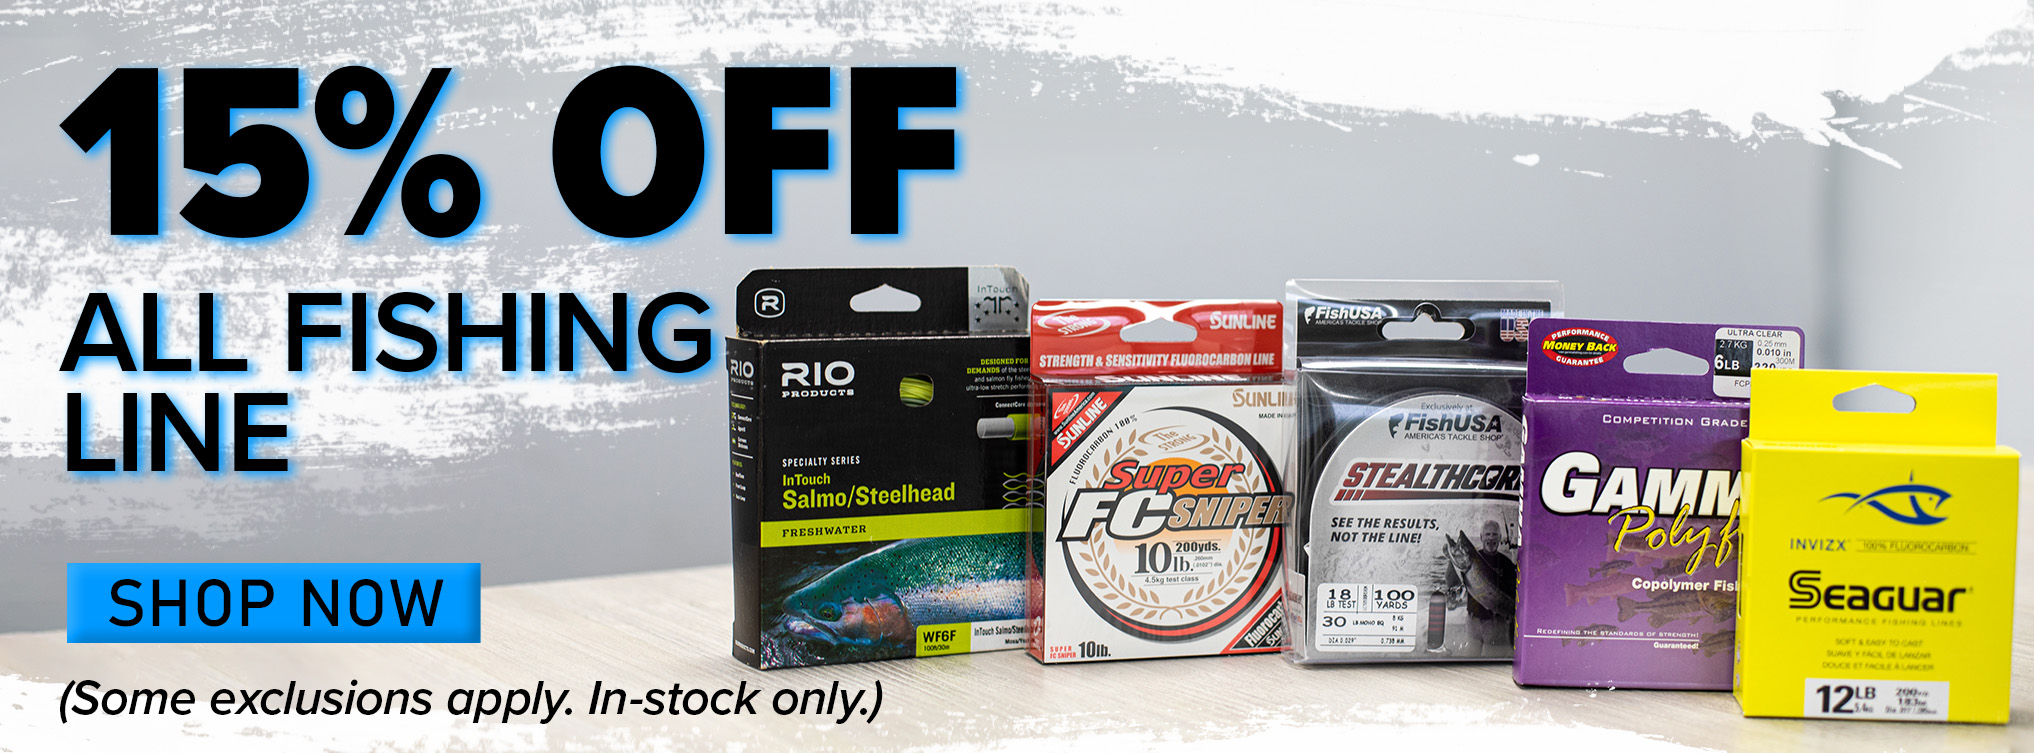 15% Off All Fishing Line Shop Now (Some exclusions apply. In-stock only.)